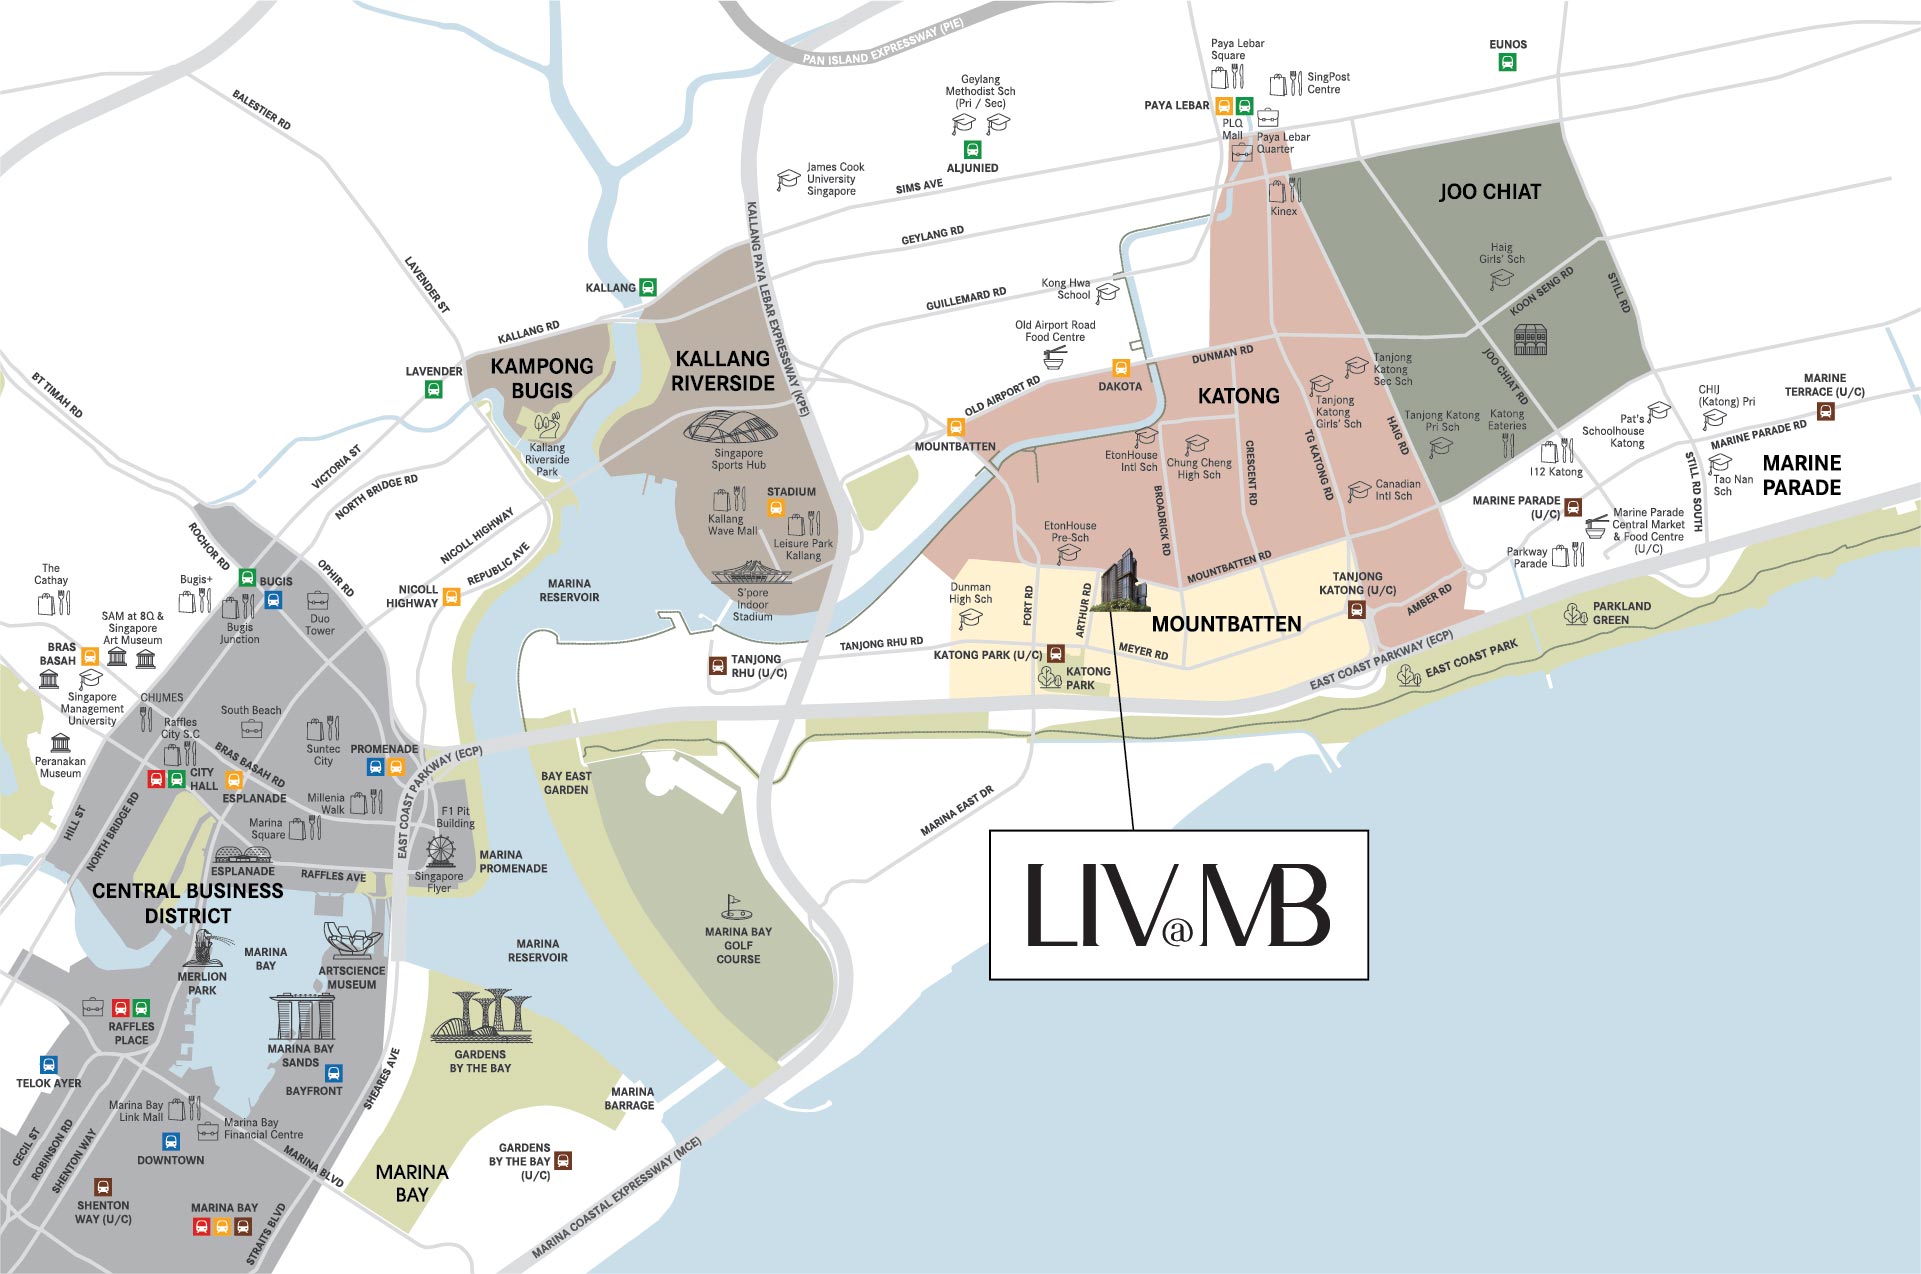 LIV @ MB's location map